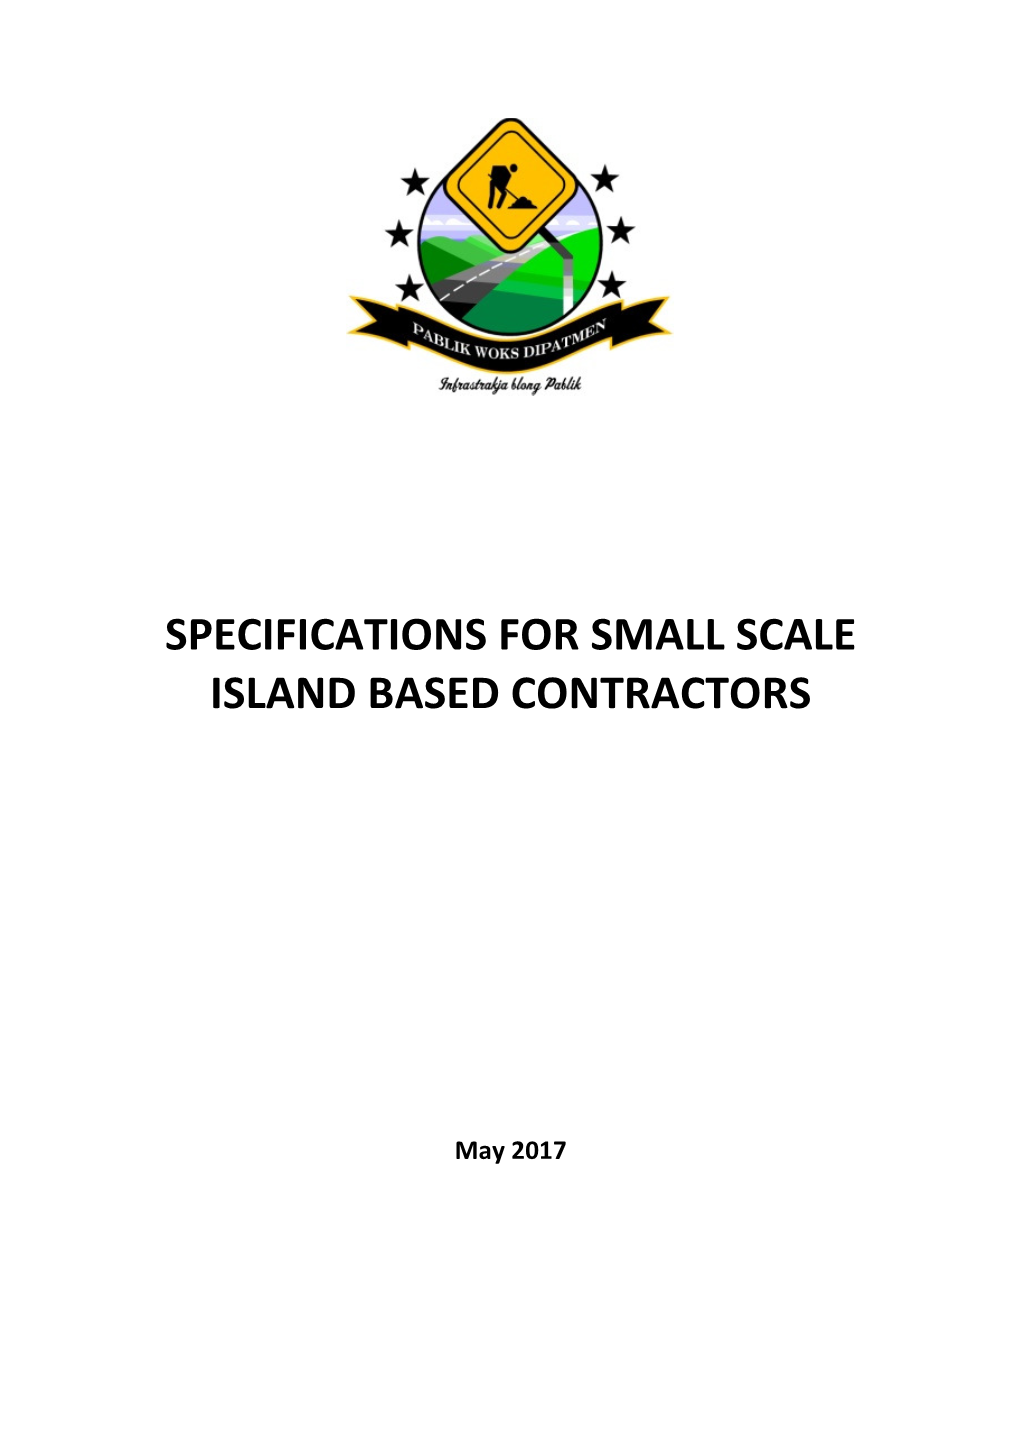 Specifications for Small Scale Island Based Contractors